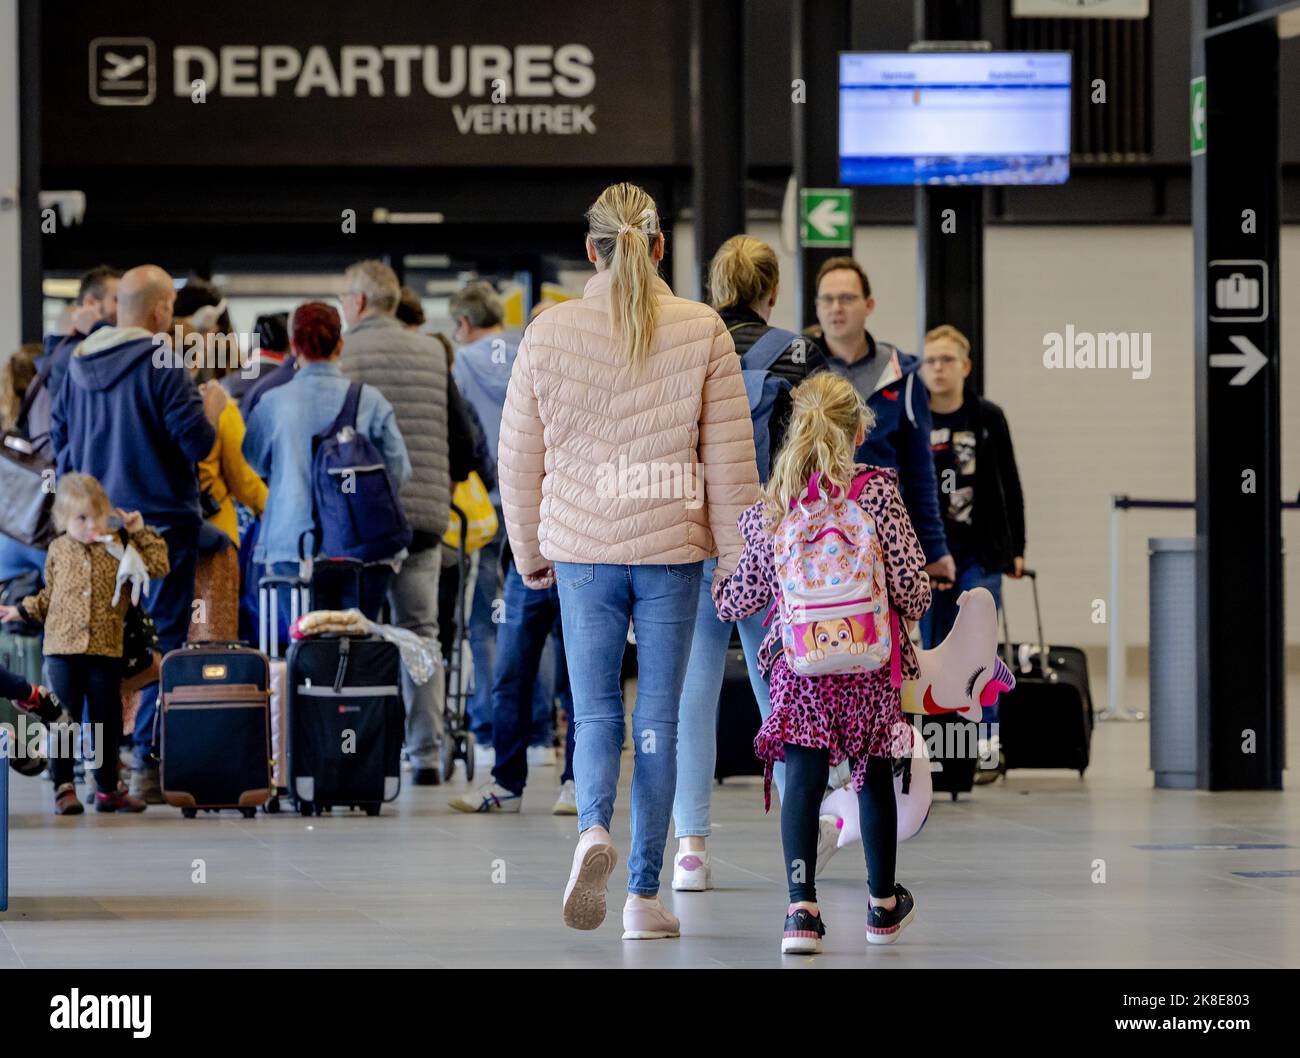 2022-10-23 09:26:47 MAASTRICHT - Travelers at Maastricht Aachen Airport. Schiphol buys itself from Limburg airport for 4 million euros. ANP ROBIN VAN LONKHUIJSEN netherlands out - belgium out Stock Photo